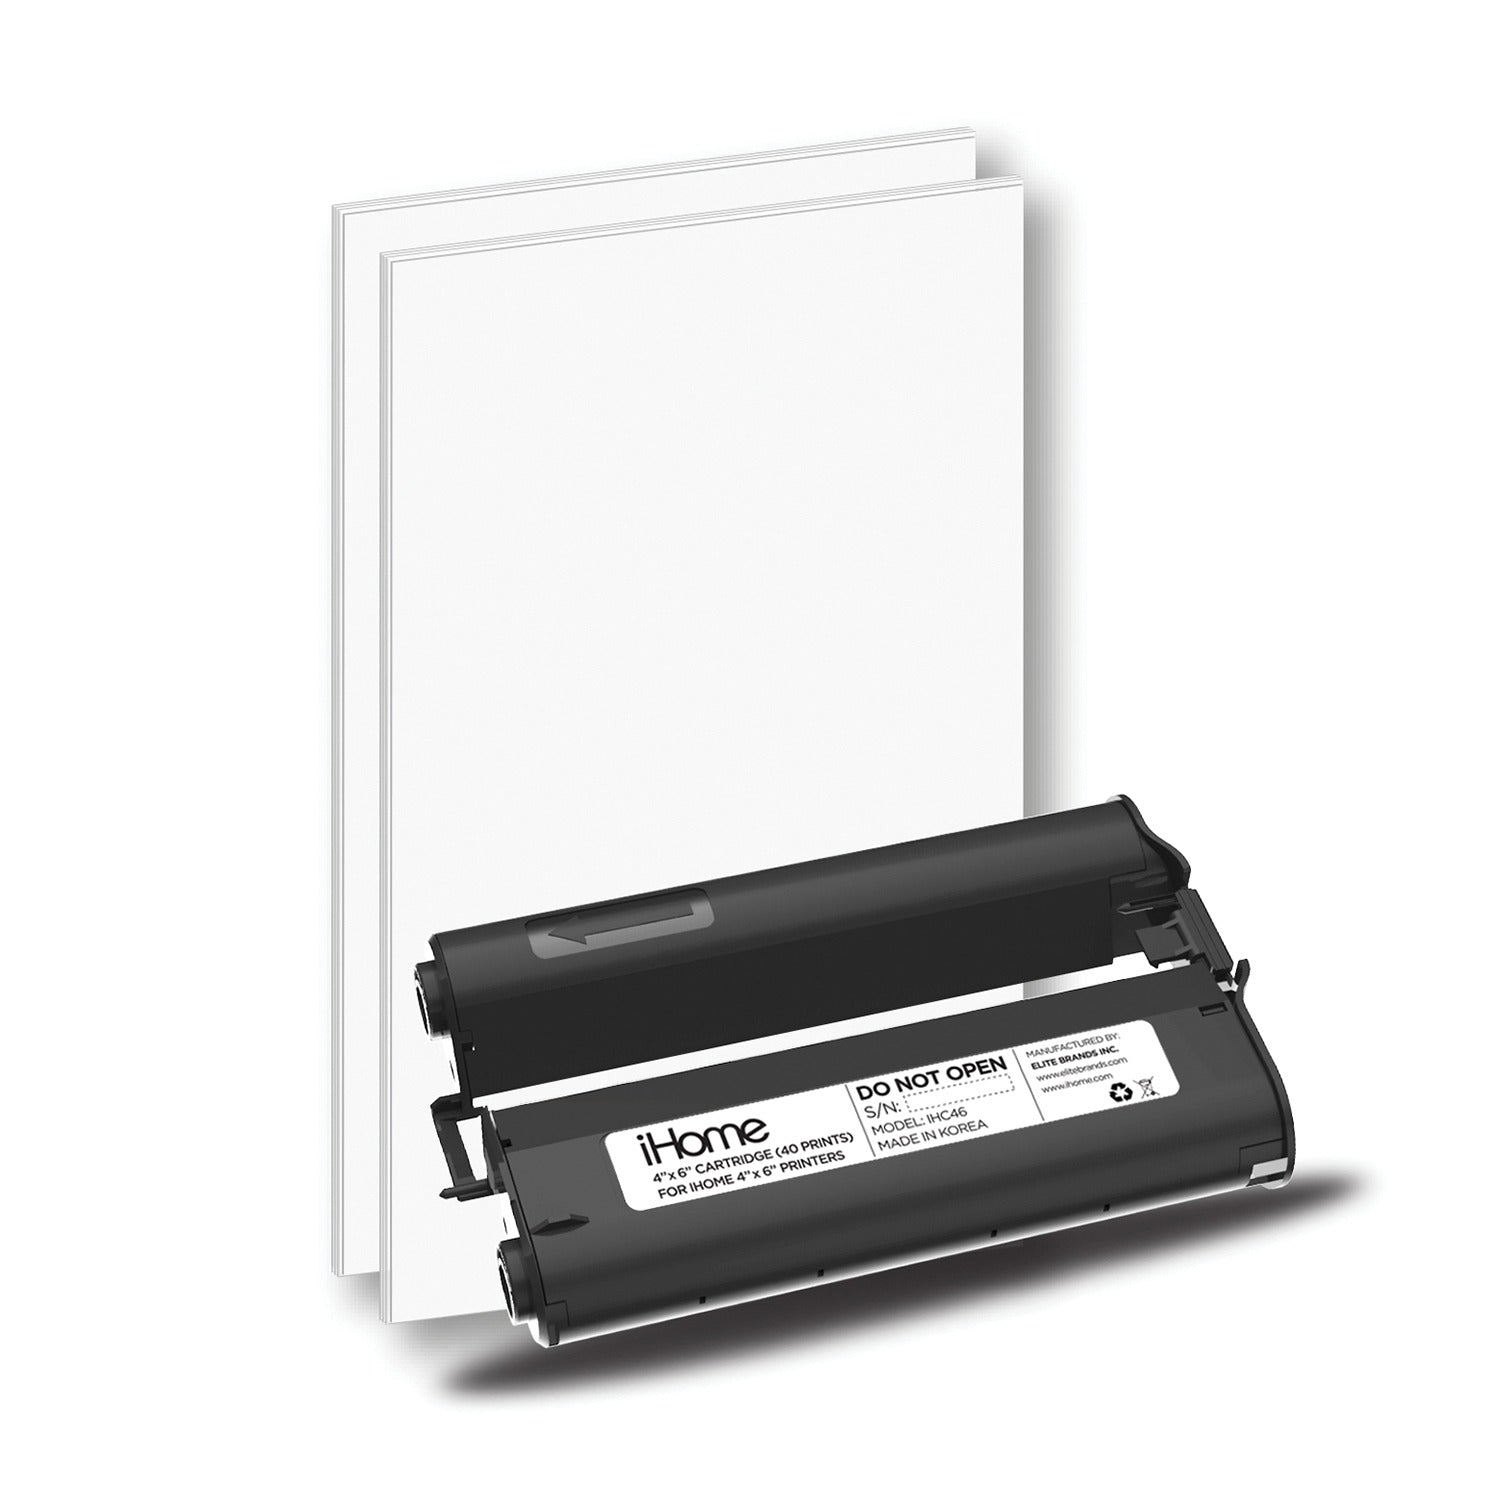 iHome 4-Inch x 6-Inch Ink + Paper Refill Cartridge, 40 Prints